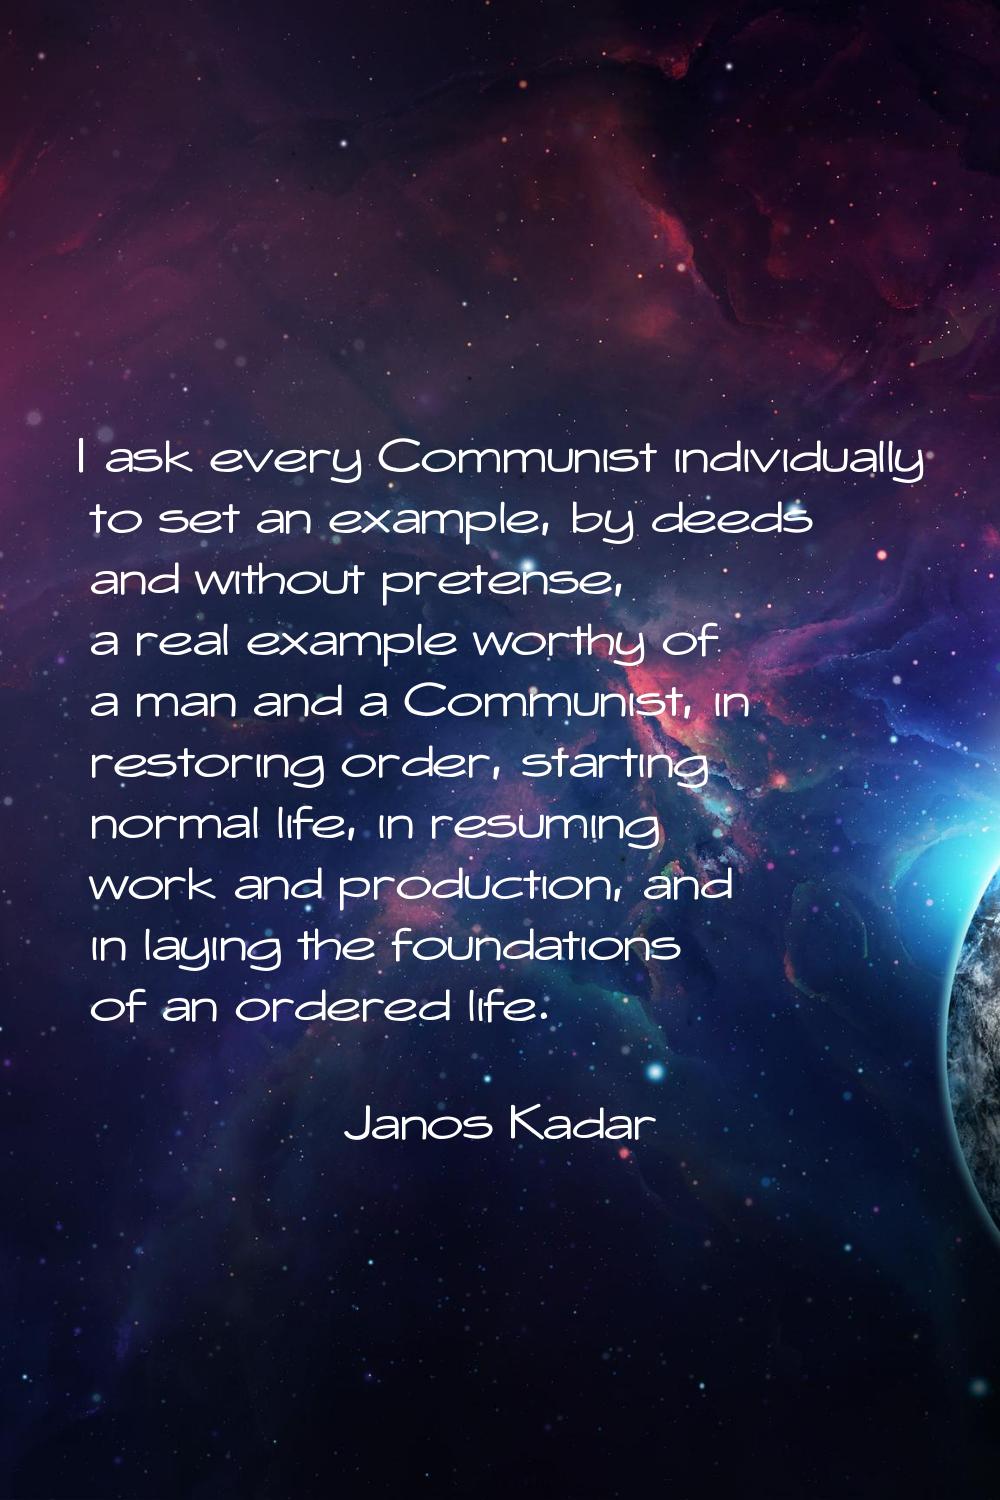 I ask every Communist individually to set an example, by deeds and without pretense, a real example